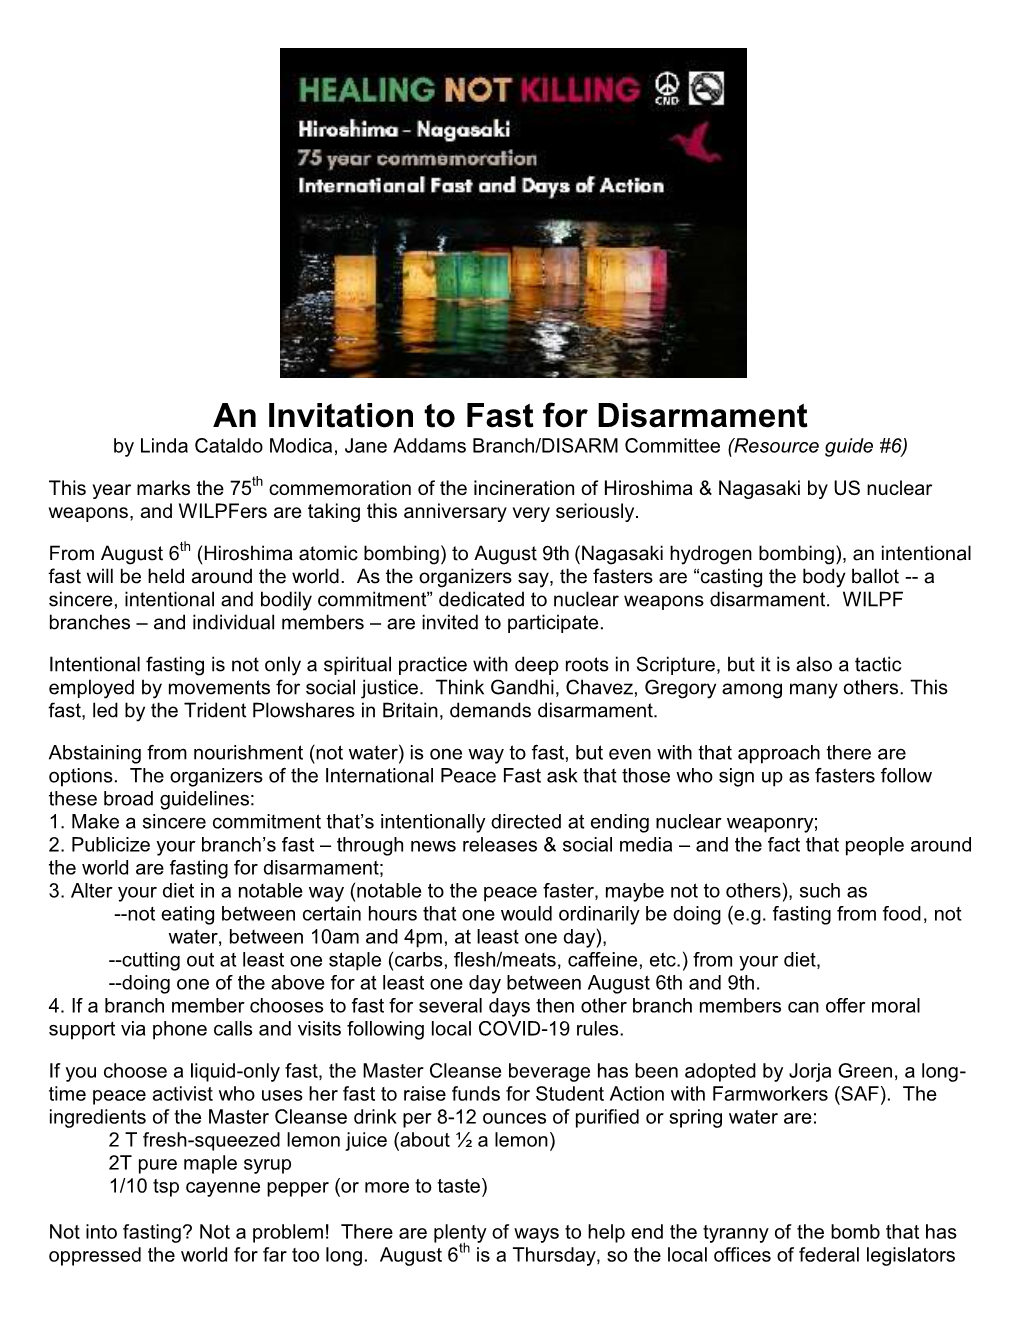 An Invitation to Fast for Disarmament by Linda Cataldo Modica, Jane Addams Branch/DISARM Committee (Resource Guide #6)